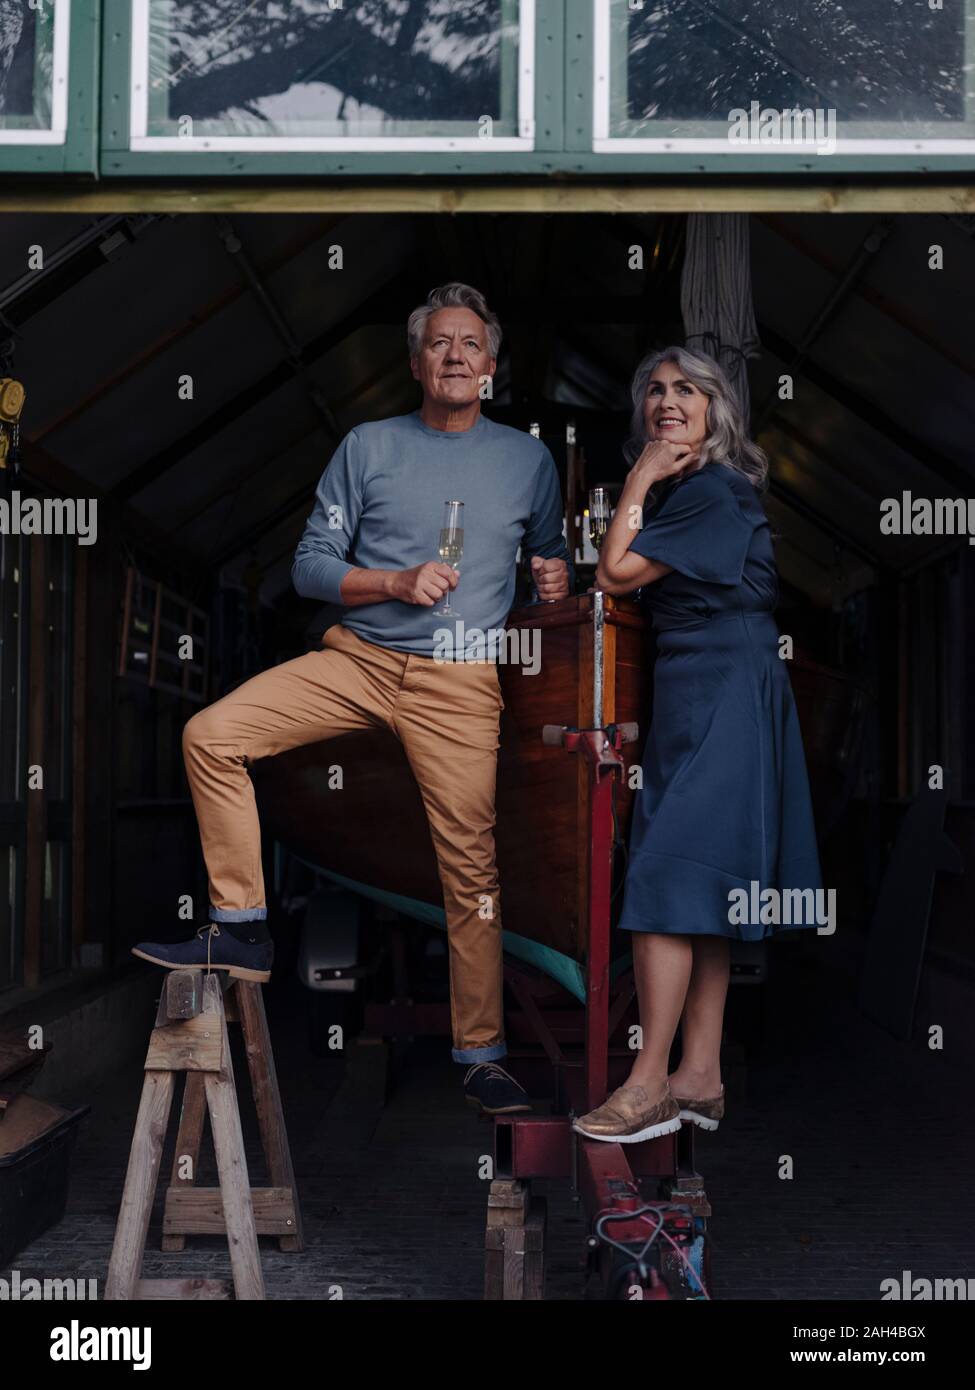 Senior couple in a boathouse with glass of champagne Stock Photo